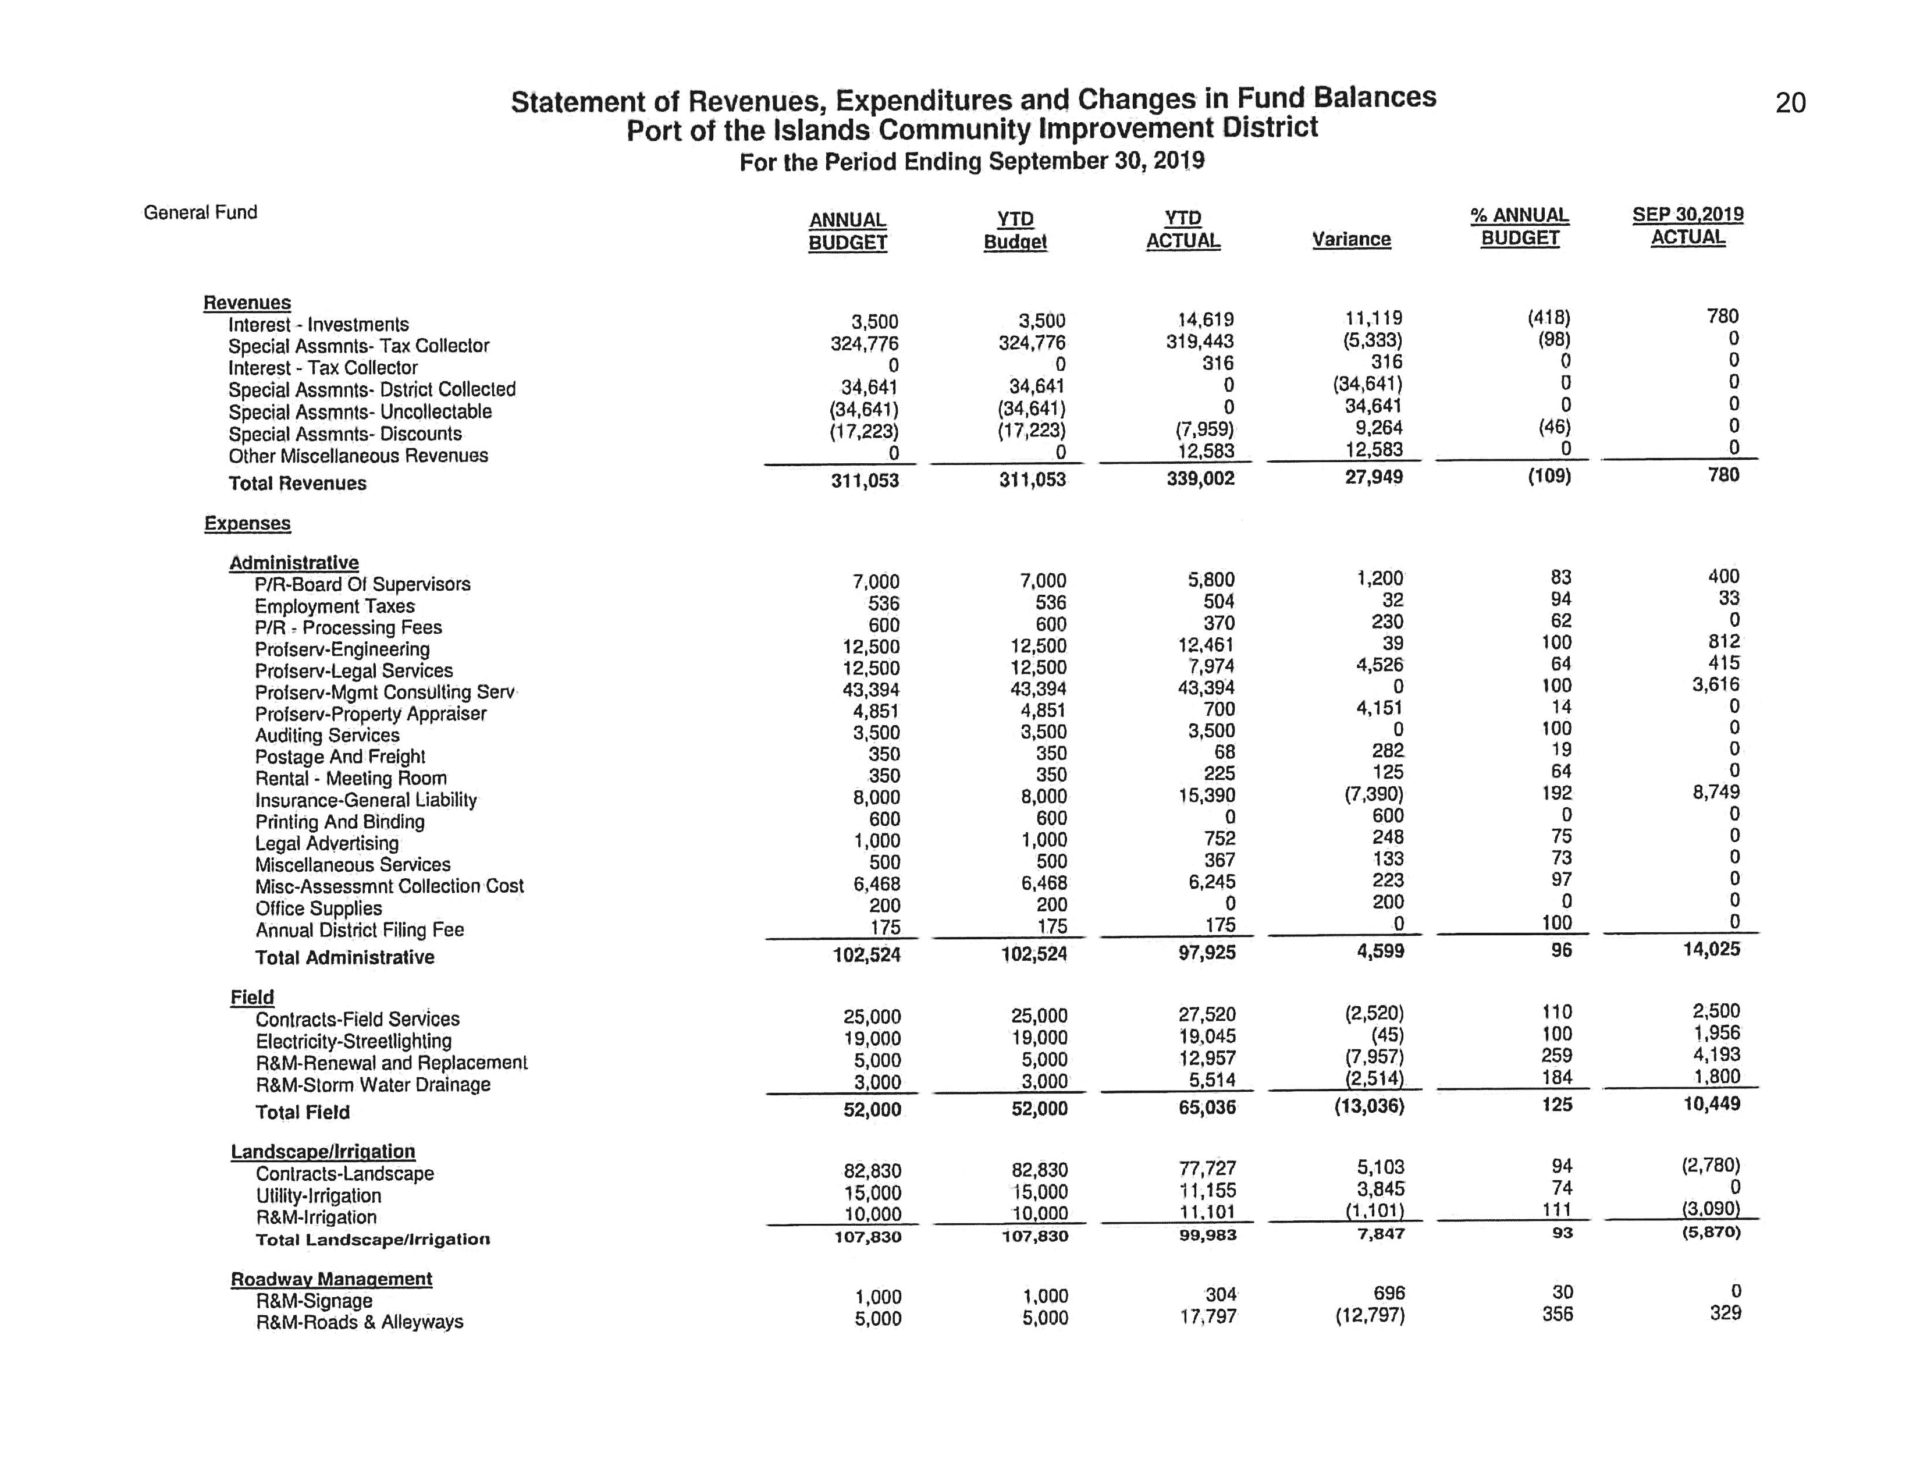 Statement of Revenues, Expenditures and Changes in Fund Balances 9-2019